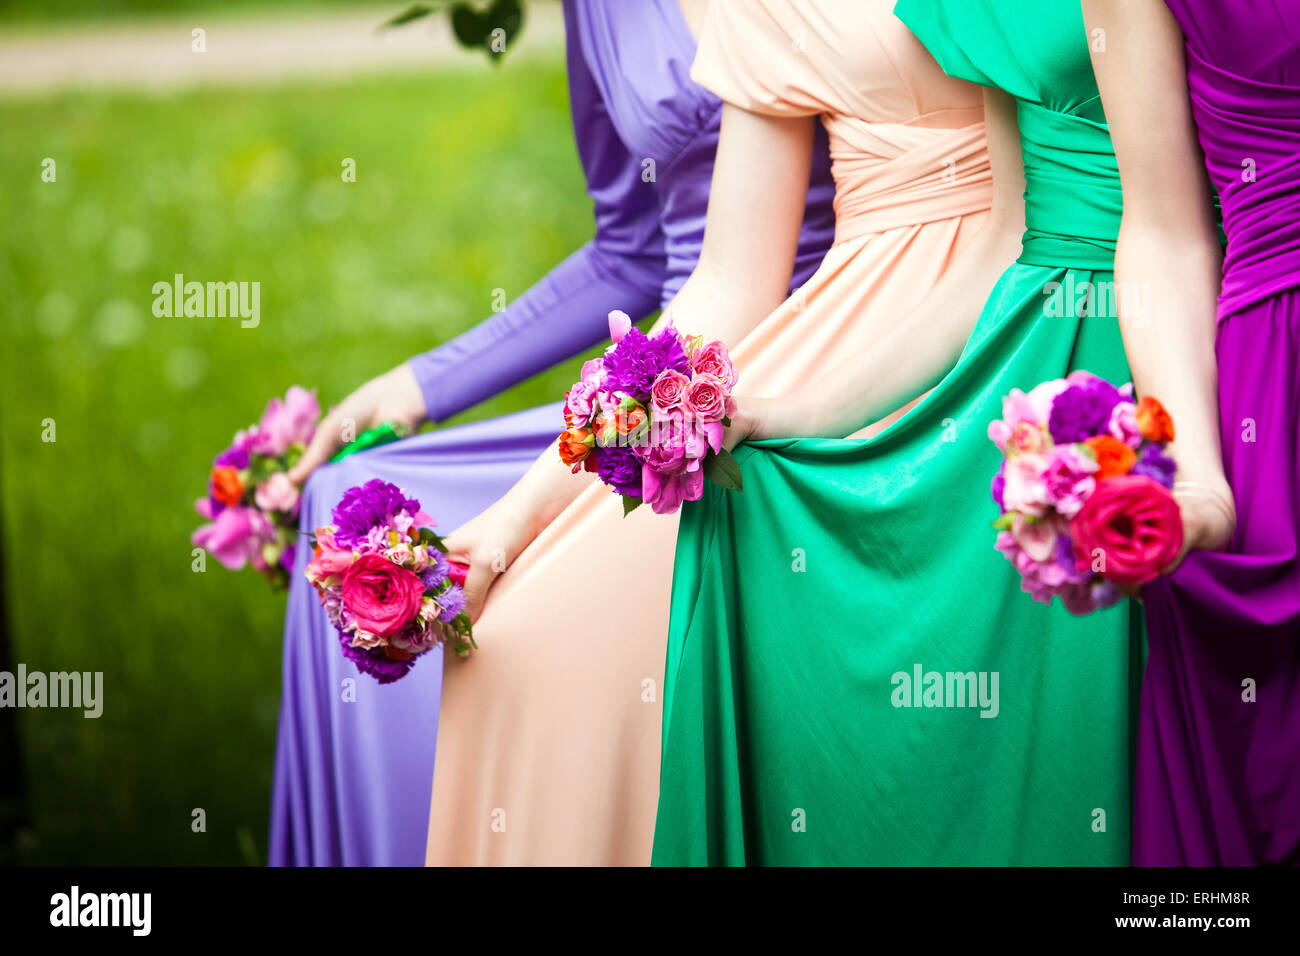 Bridesmaids in colorful dresses with bouquets of flowers Stock Photo